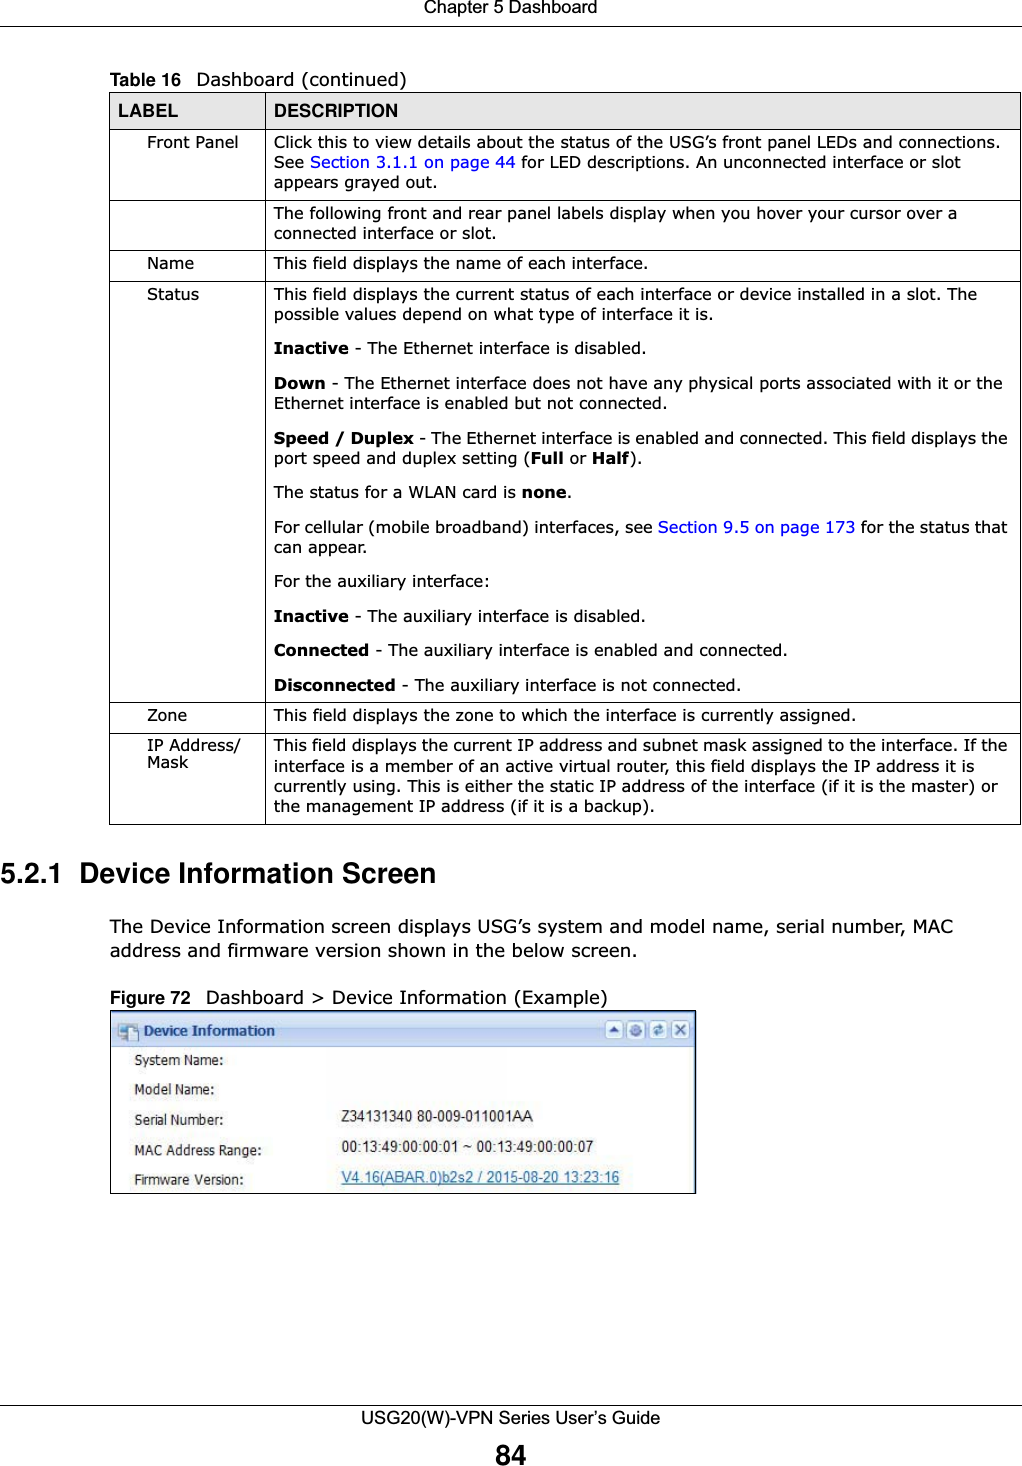 Chapter 5 DashboardUSG20(W)-VPN Series User’s Guide845.2.1  Device Information ScreenThe Device Information screen displays USG’s system and model name, serial number, MAC address and firmware version shown in the below screen.Figure 72   Dashboard &gt; Device Information (Example)Front Panel Click this to view details about the status of the USG’s front panel LEDs and connections. See Section 3.1.1 on page 44 for LED descriptions. An unconnected interface or slot appears grayed out.The following front and rear panel labels display when you hover your cursor over a connected interface or slot.Name This field displays the name of each interface. Status This field displays the current status of each interface or device installed in a slot. The possible values depend on what type of interface it is.Inactive - The Ethernet interface is disabled.Down - The Ethernet interface does not have any physical ports associated with it or the Ethernet interface is enabled but not connected.Speed / Duplex - The Ethernet interface is enabled and connected. This field displays the port speed and duplex setting (Full or Half).The status for a WLAN card is none.For cellular (mobile broadband) interfaces, see Section 9.5 on page 173 for the status that can appear.For the auxiliary interface:Inactive - The auxiliary interface is disabled.Connected - The auxiliary interface is enabled and connected. Disconnected - The auxiliary interface is not connected.  Zone This field displays the zone to which the interface is currently assigned.IP Address/Mask This field displays the current IP address and subnet mask assigned to the interface. If the interface is a member of an active virtual router, this field displays the IP address it is currently using. This is either the static IP address of the interface (if it is the master) or the management IP address (if it is a backup).Table 16   Dashboard (continued)LABEL DESCRIPTION